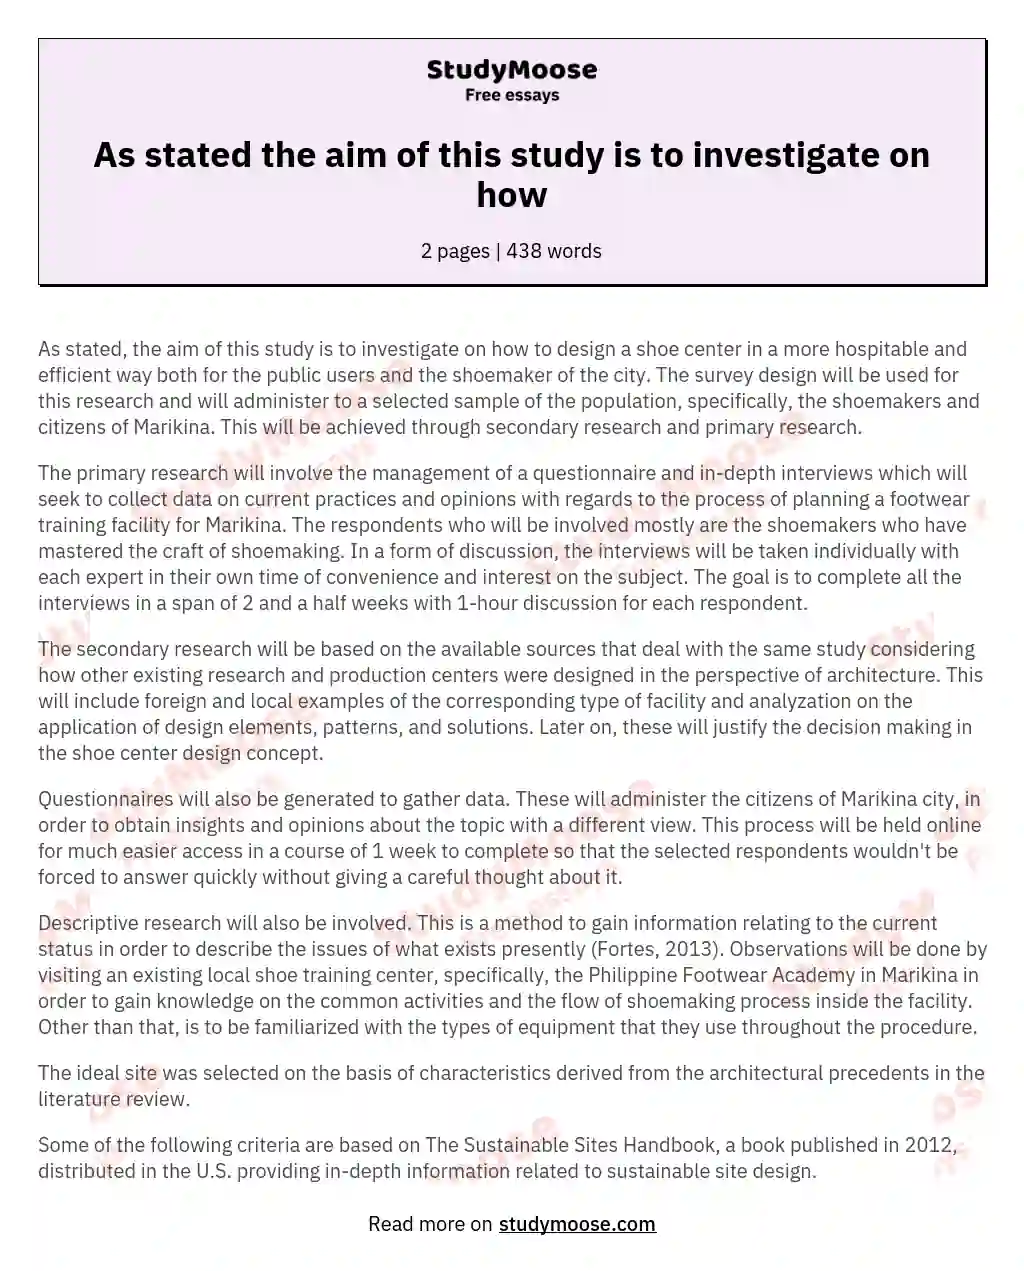 As stated the aim of this study is to investigate on how essay